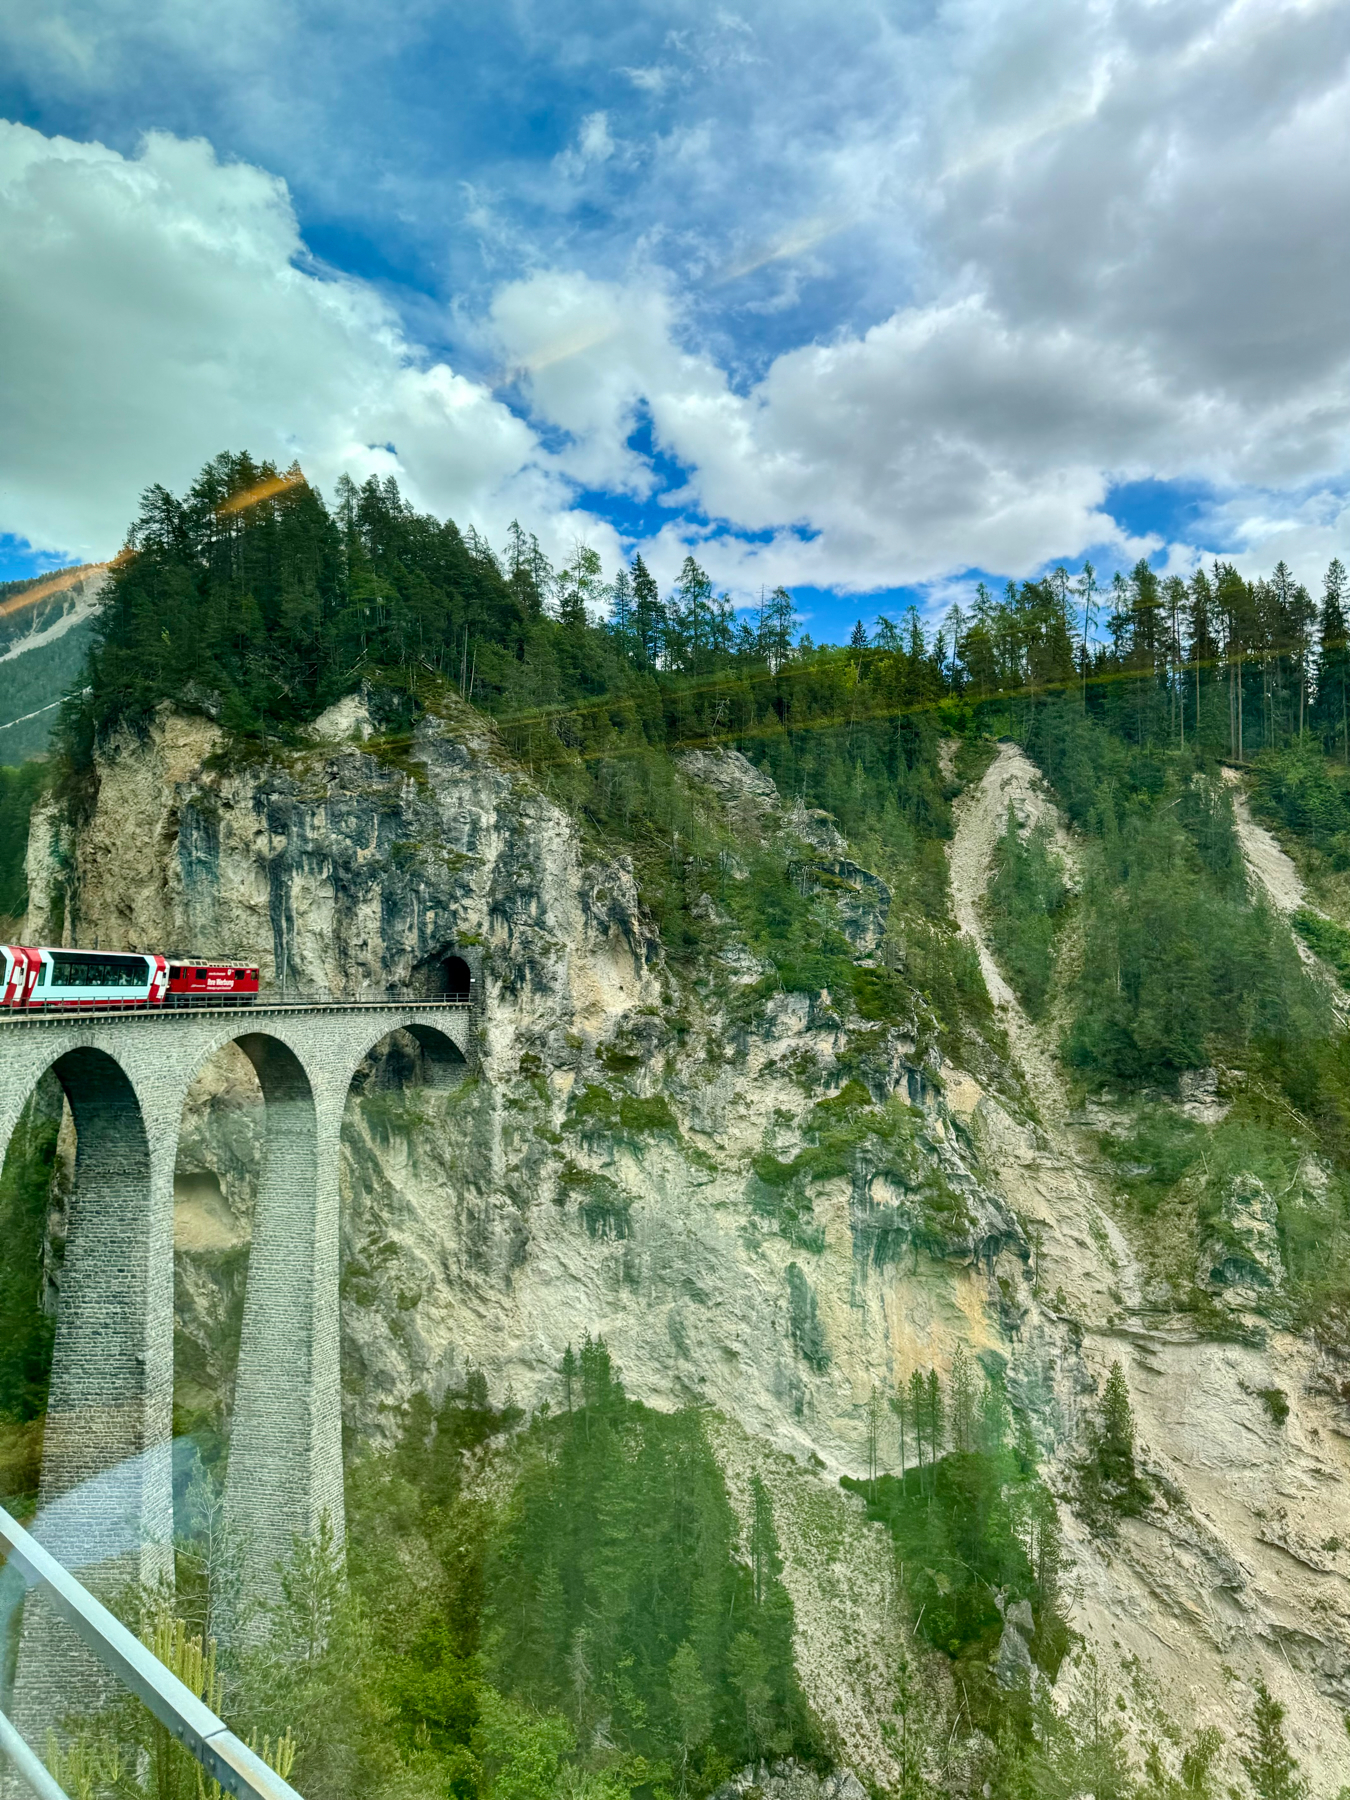 A train crossing a tall, stone arch bridge against a backdrop of steep, rocky slopes and trees under a partly cloudy sky.